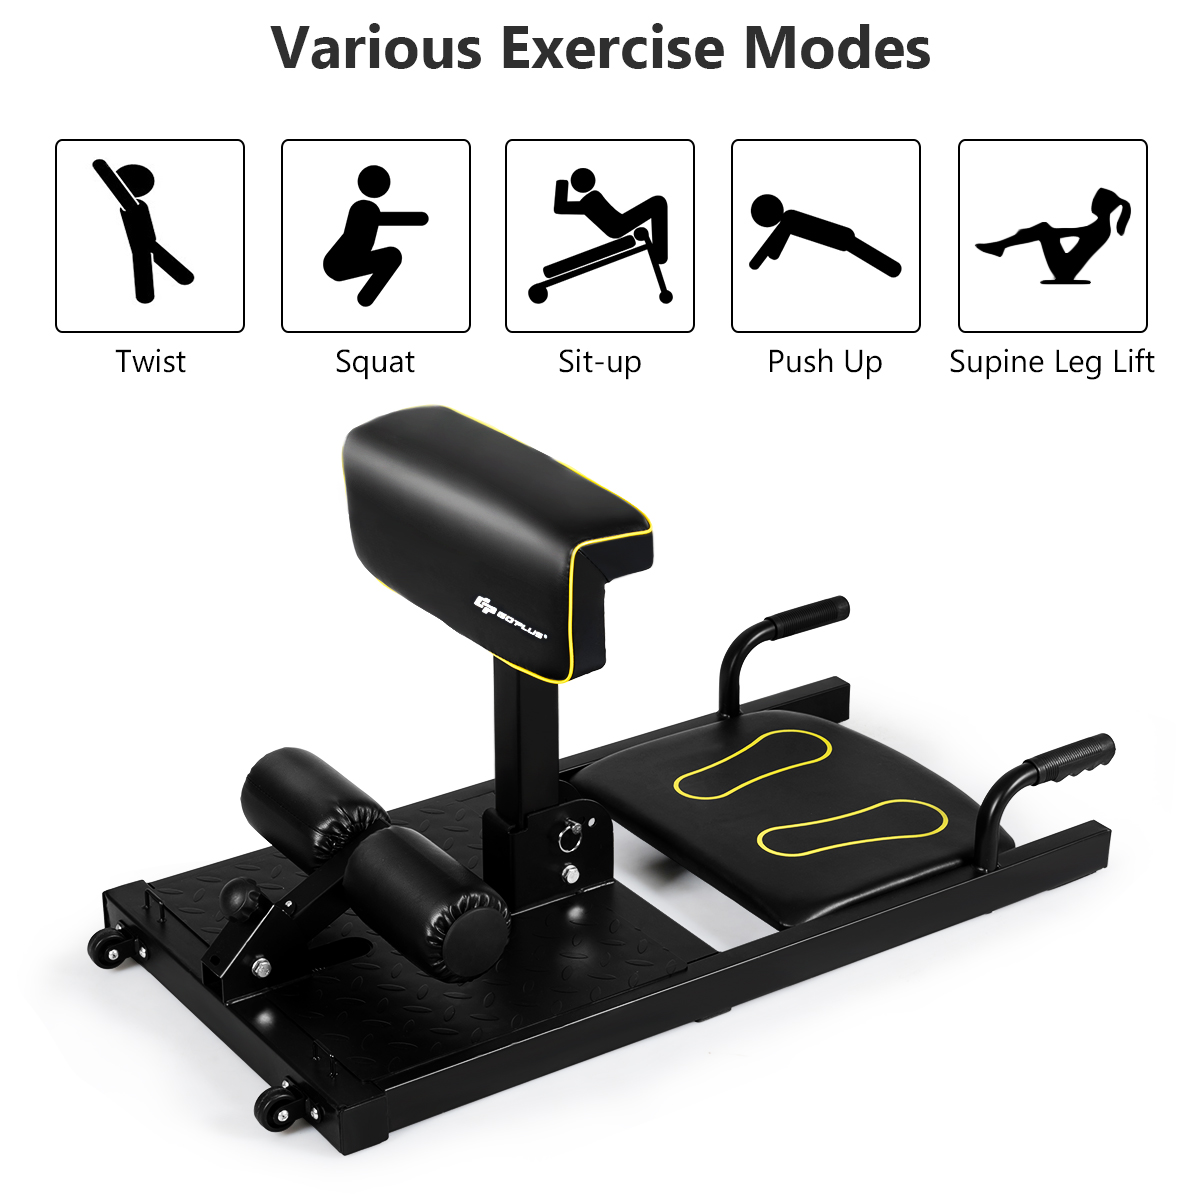 Gpolus 8-in-1 Multifunction Squat Machine Deep Sissy Squat Home Gym Fitness Ab Trainer - image 7 of 10